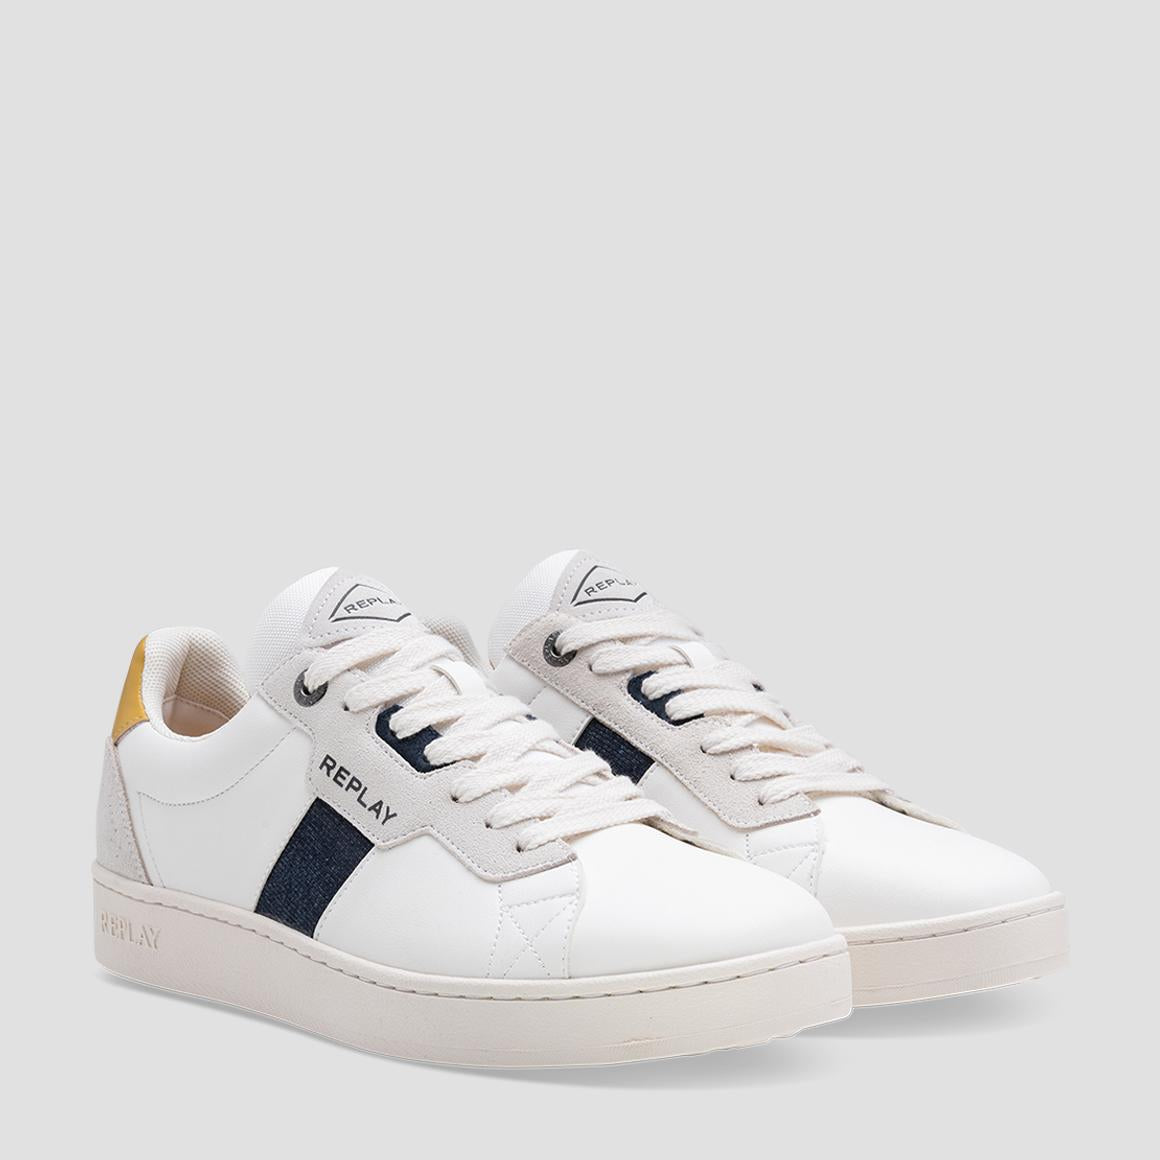 REPLAY "Smash Denim" White Leather Sneakers